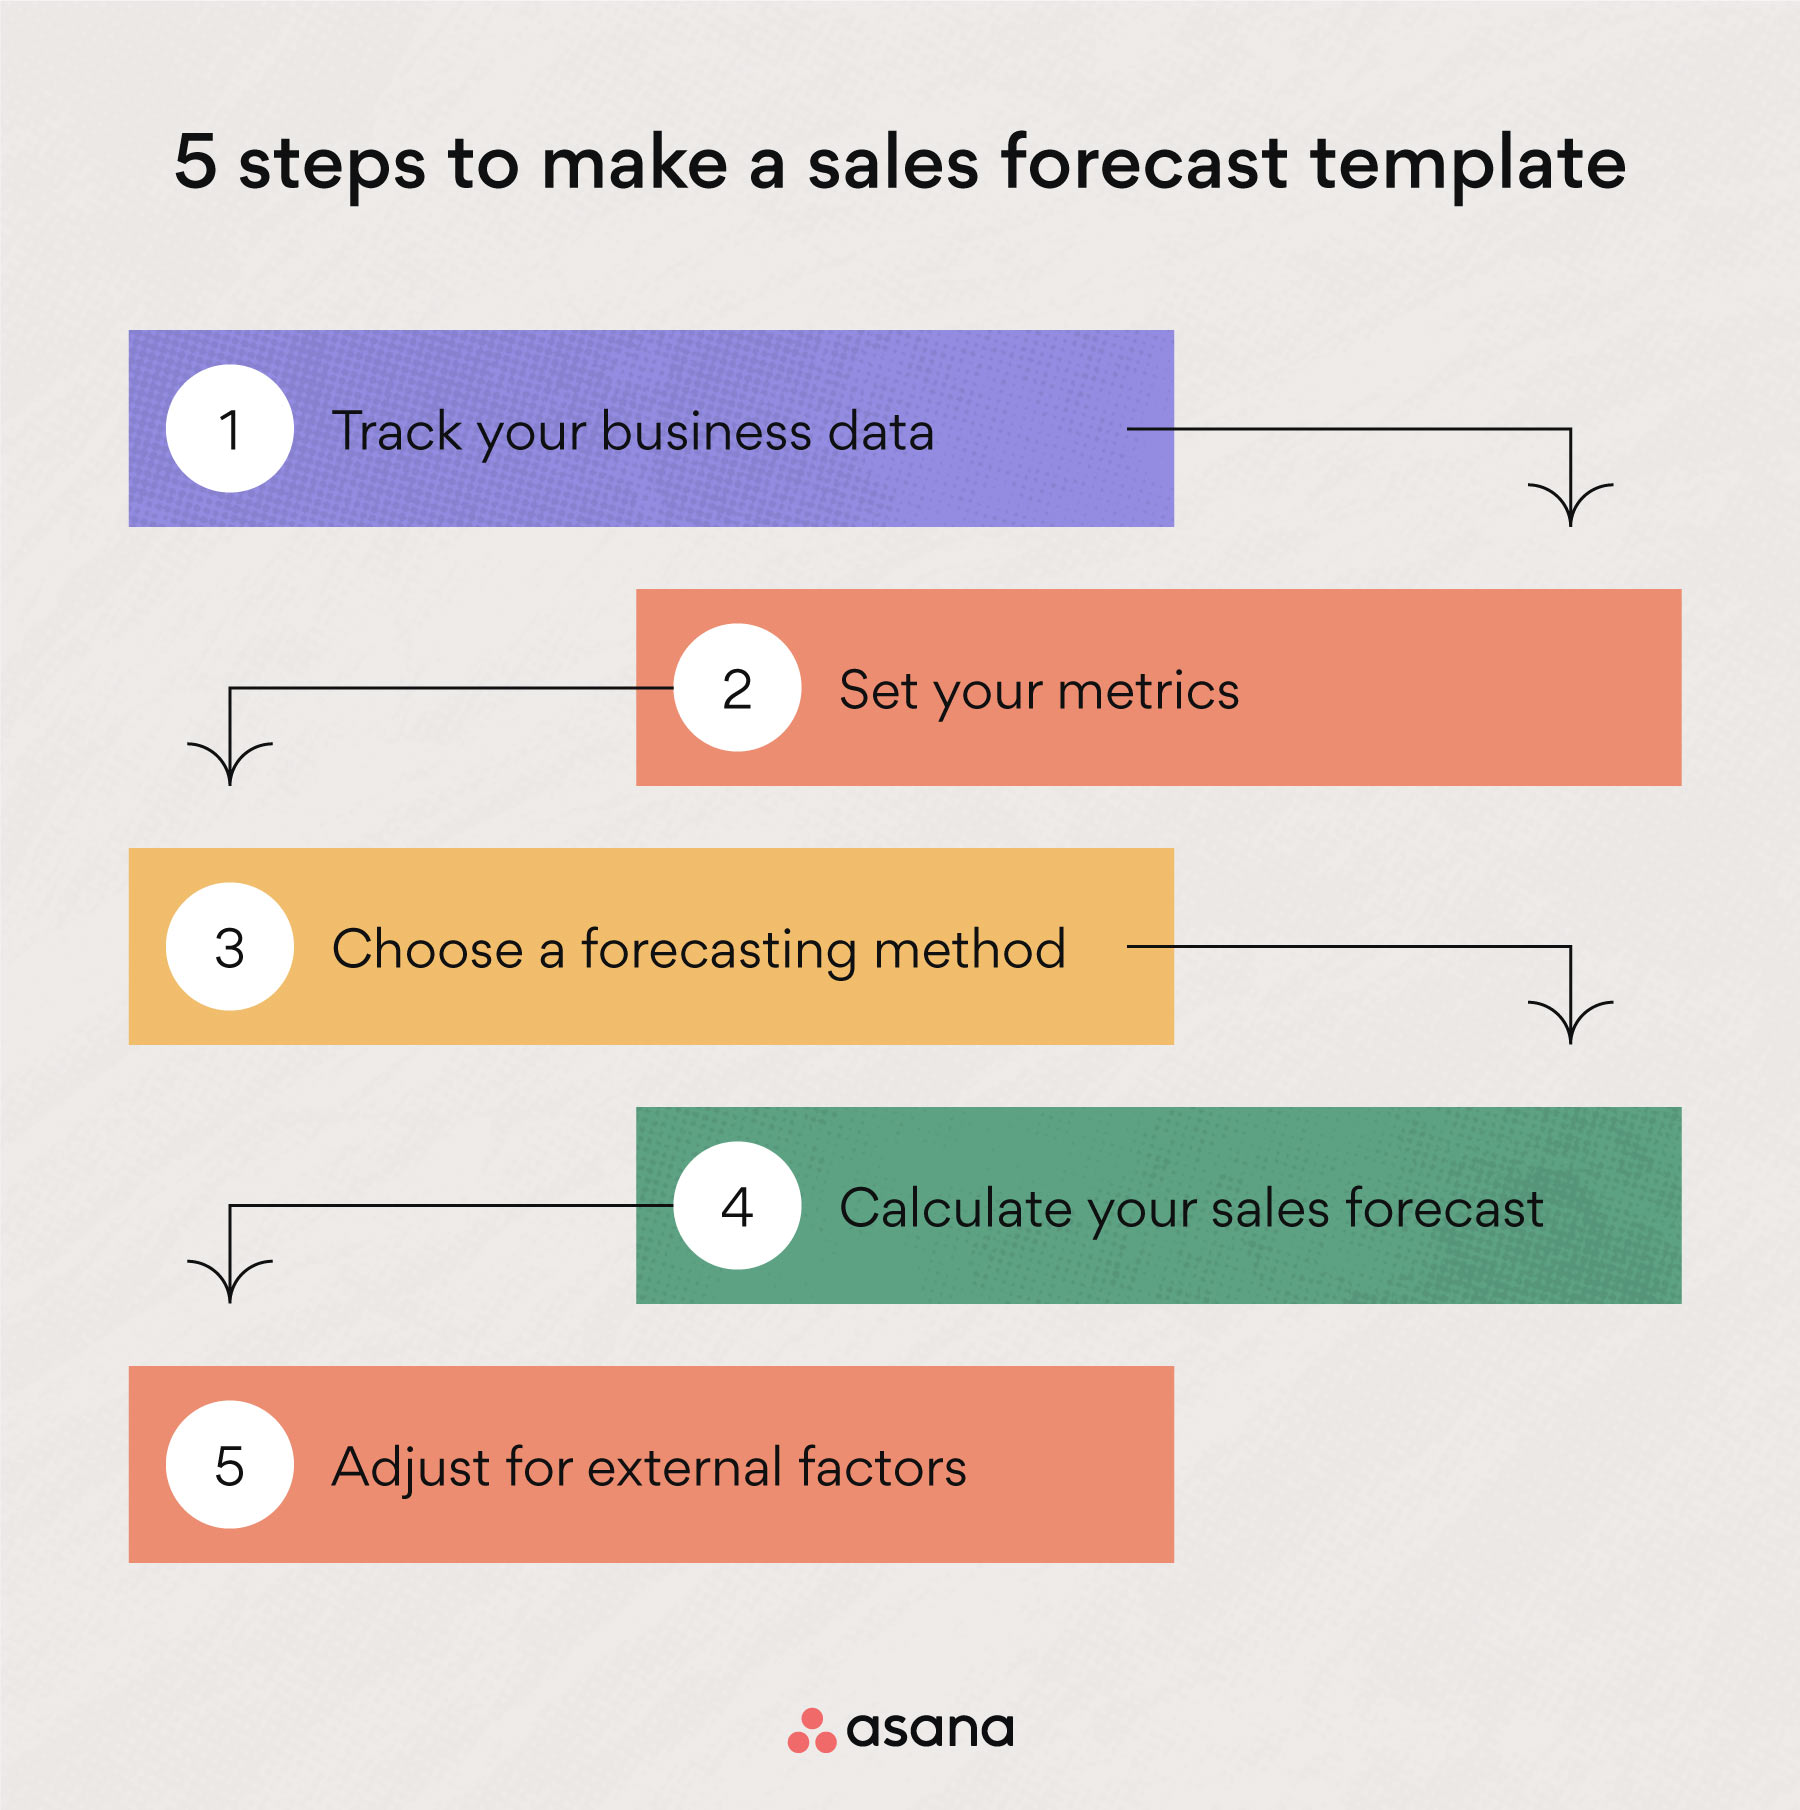 5 steps to make a sales forecast template